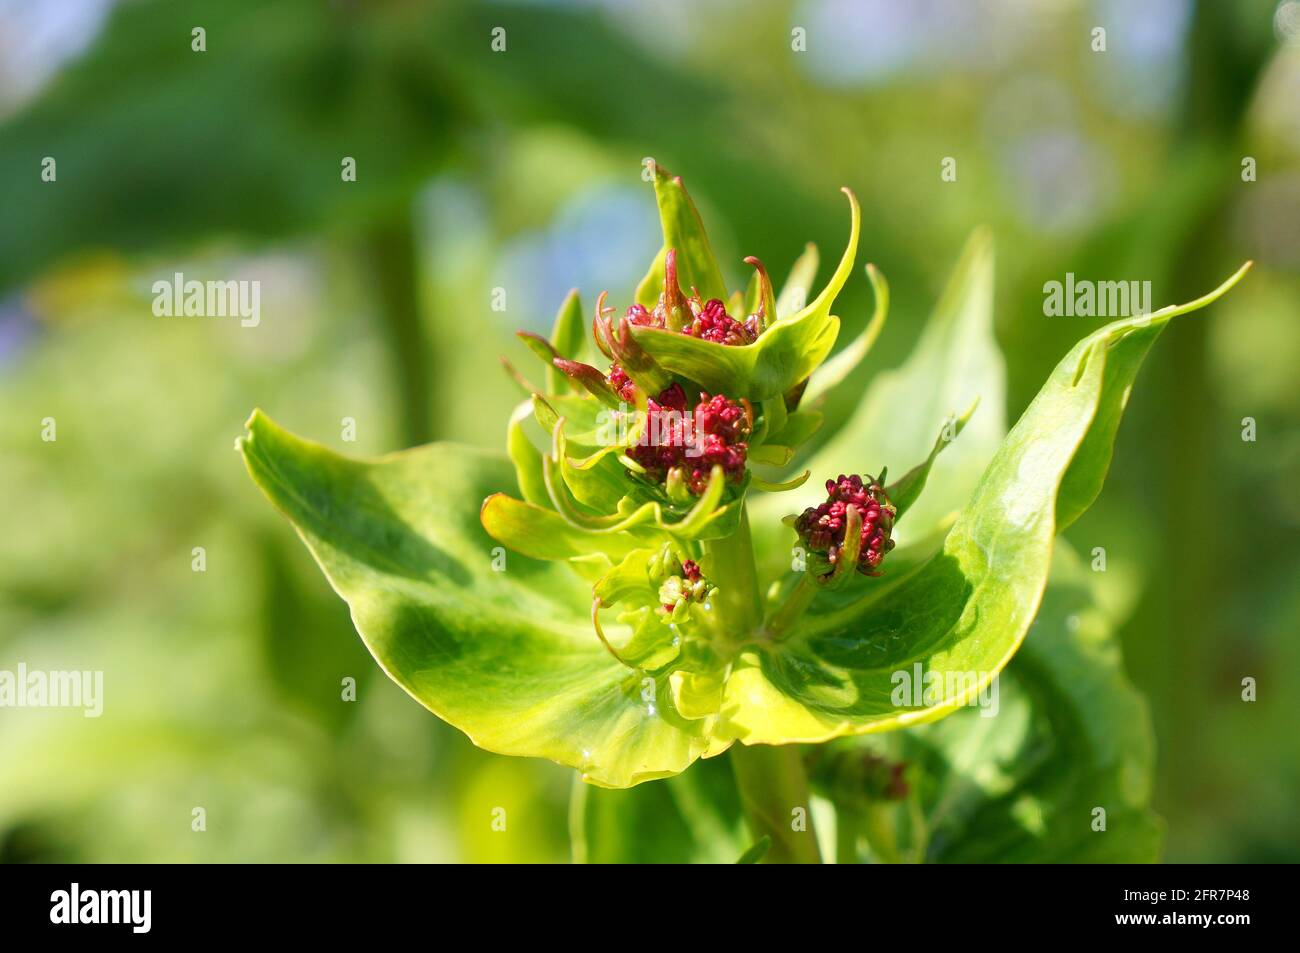 Close up of valerian (Valeriana officinalis) flowers about to bloom with soft-focus natural background Stock Photo